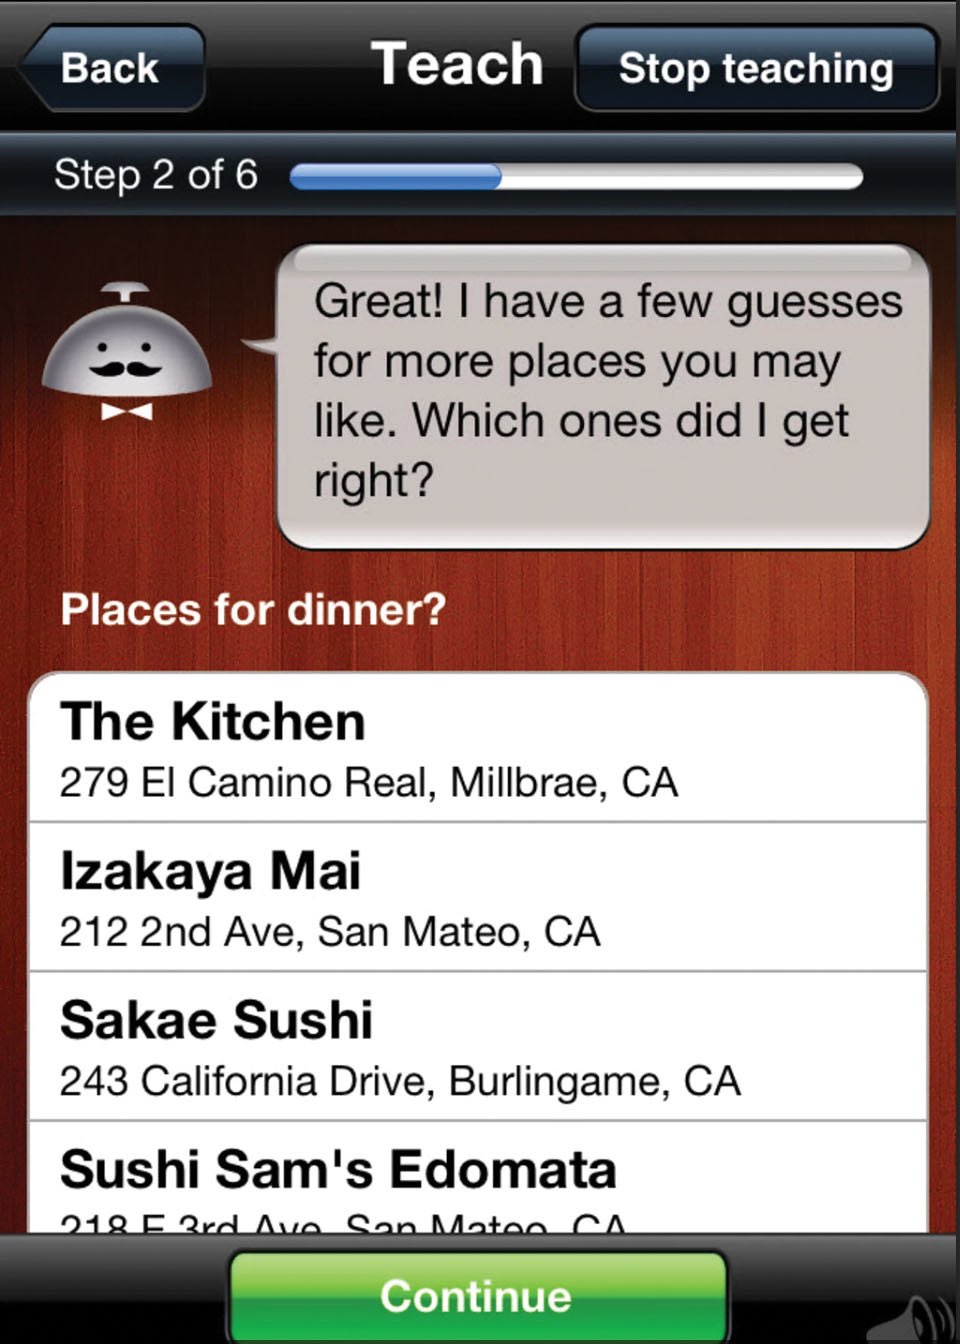 The Alfred app takes a guess at places the user might enjoy for dinner and asks if any of them are right.